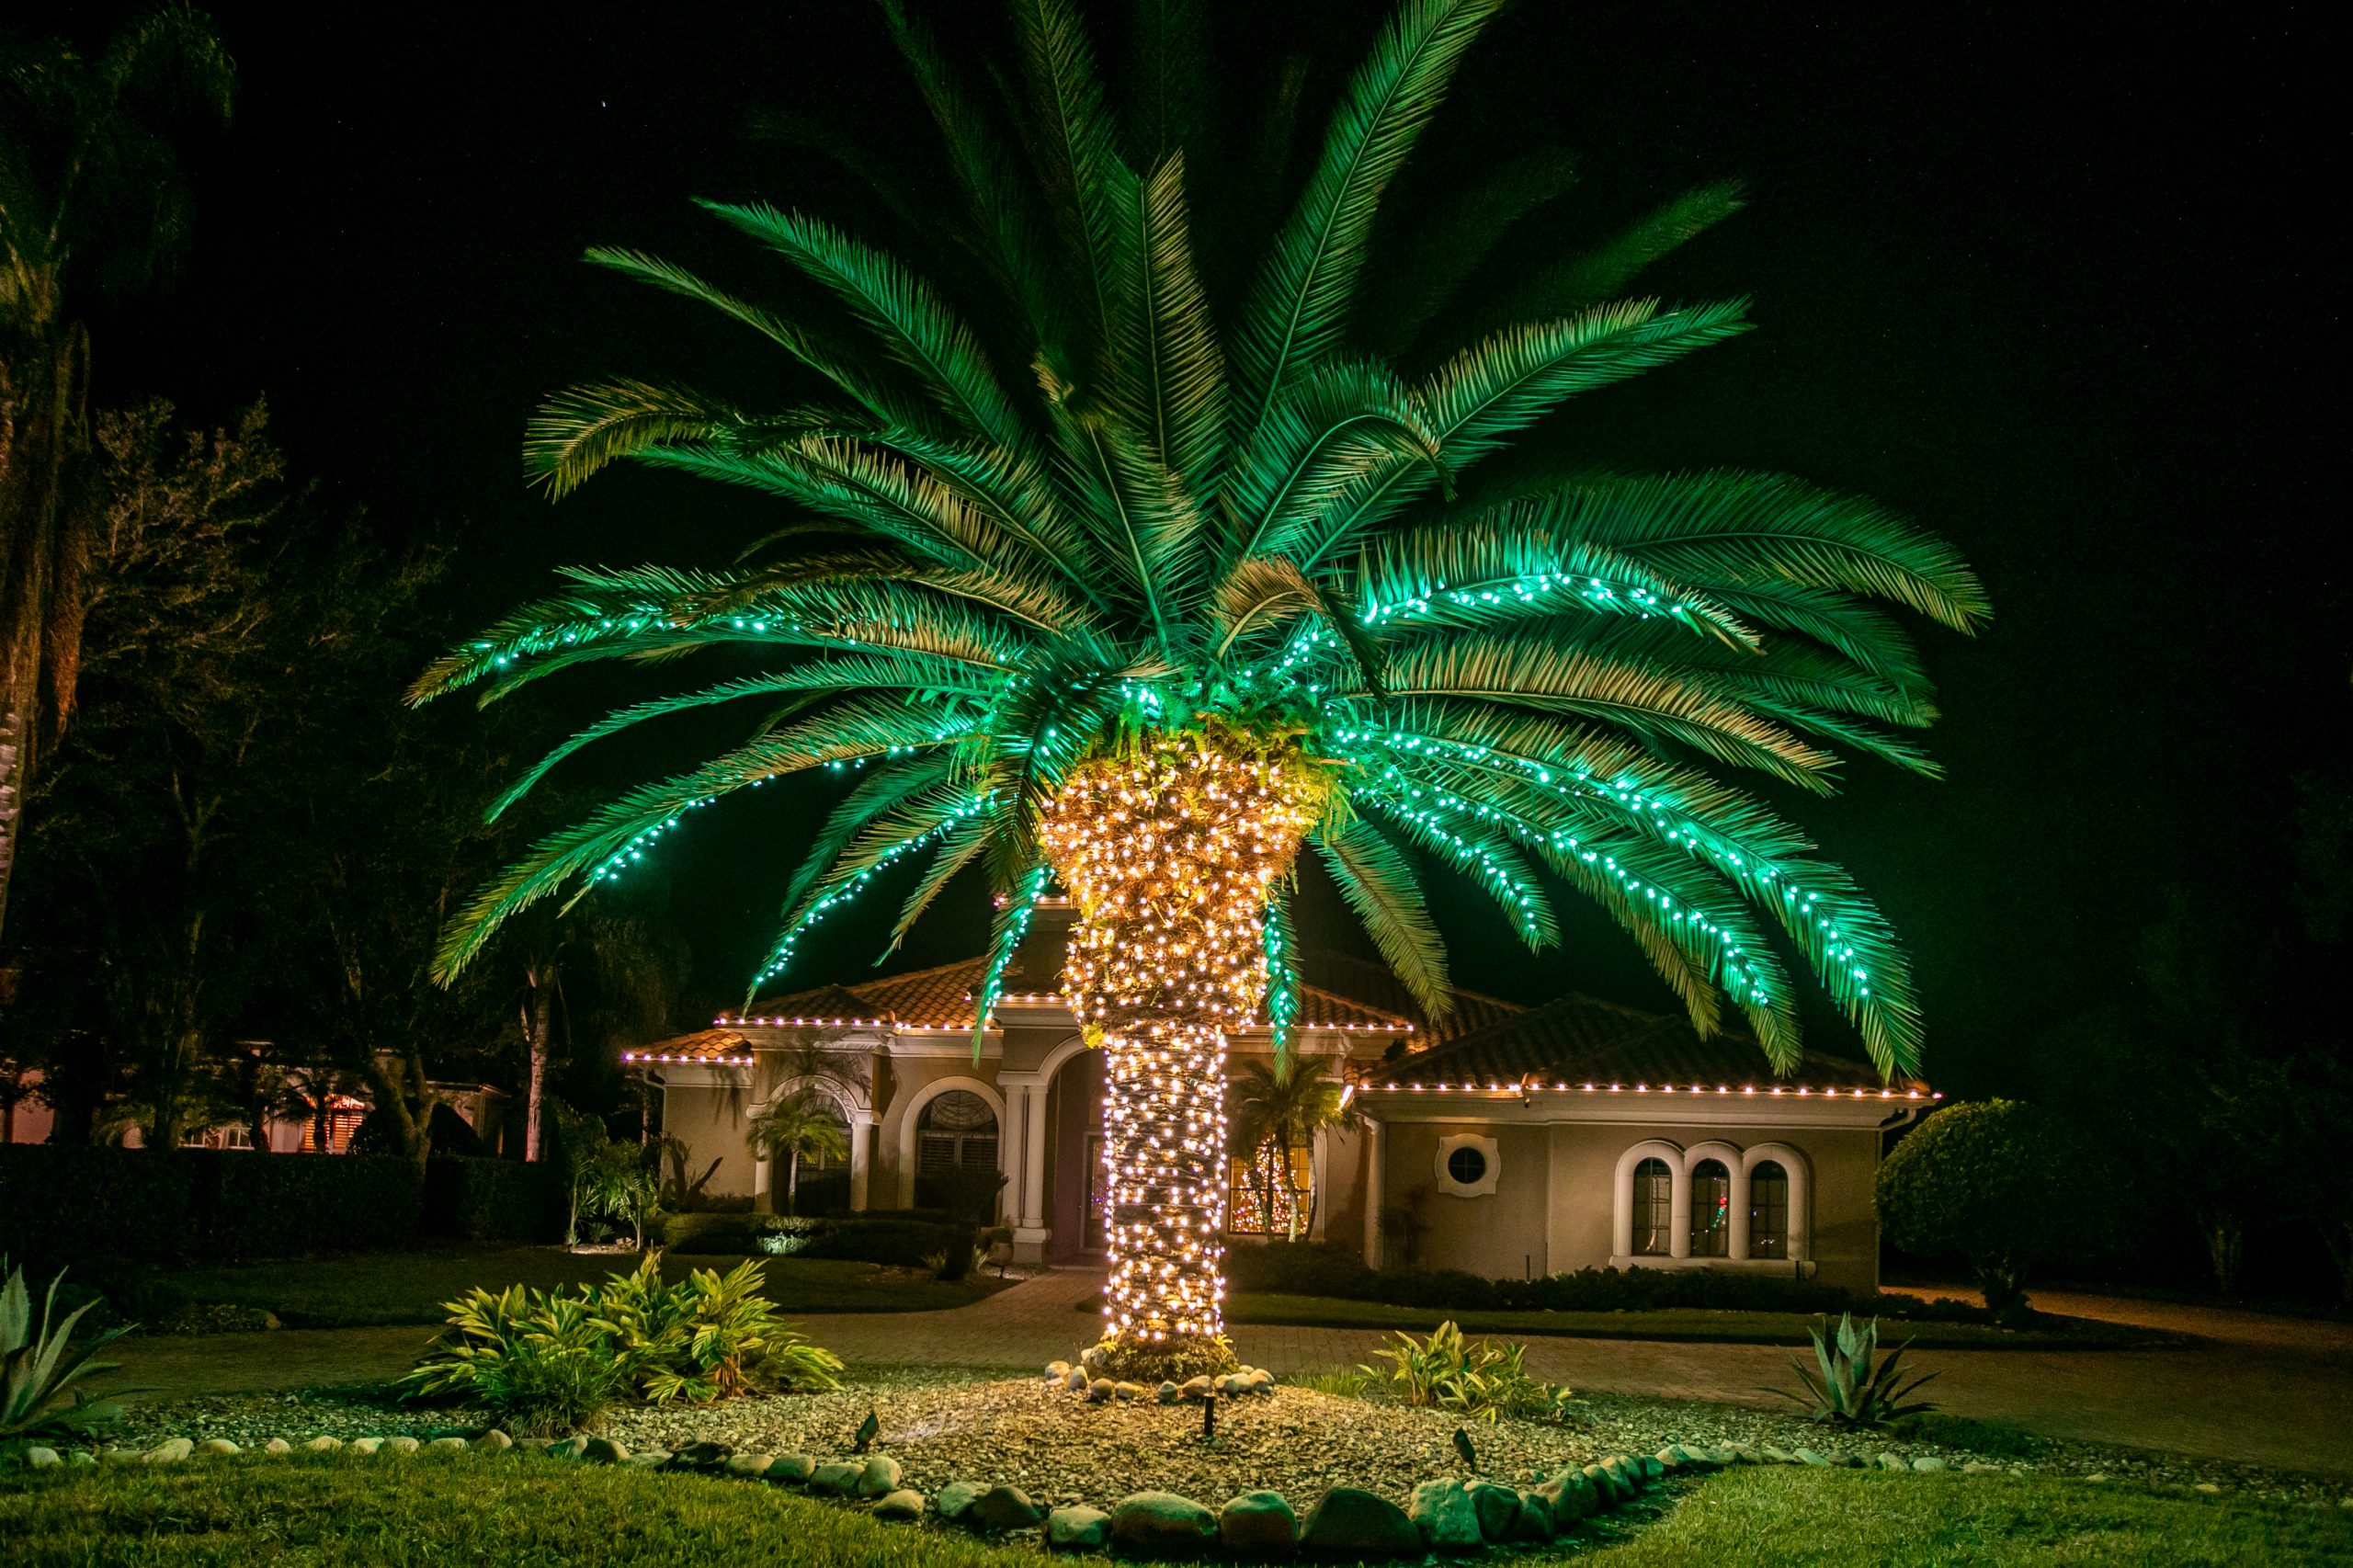 TPG Lighting LLC: The Go-To Lighting Contractor for Stunning Holiday Displays